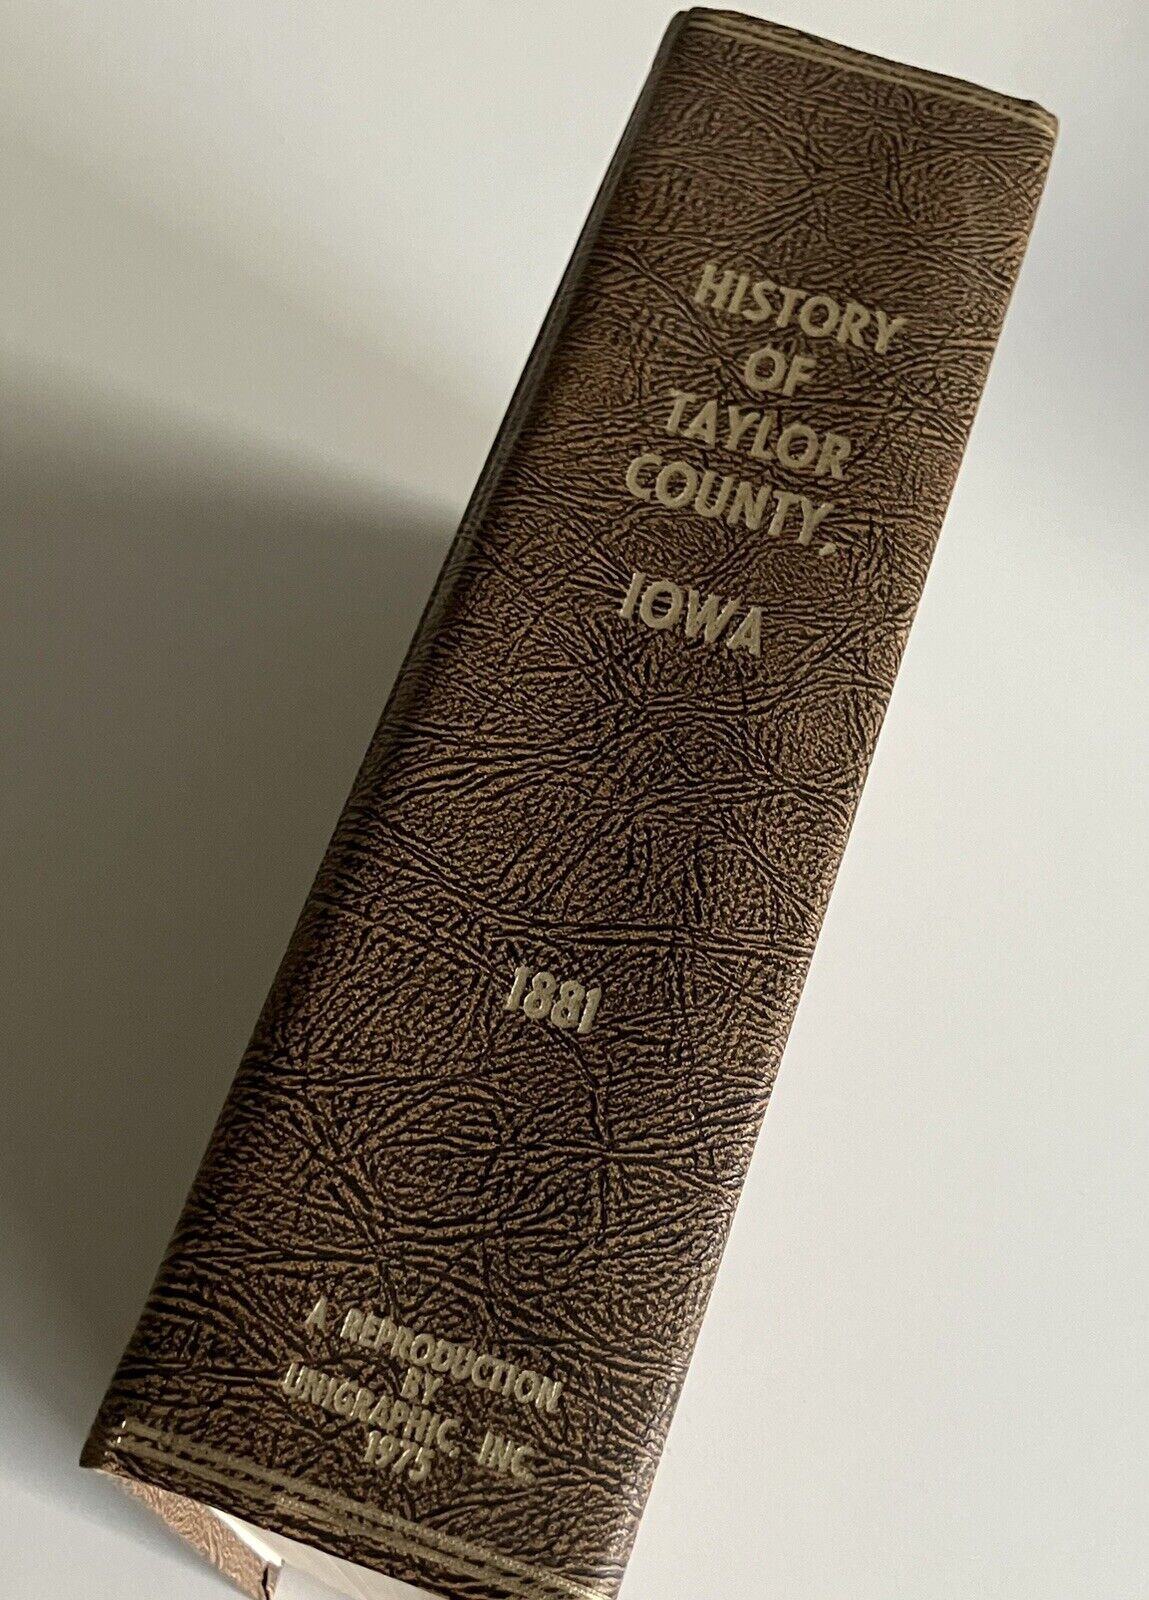 1881 History Of Taylor County Iowa Des Moines Historical Society Reproduction